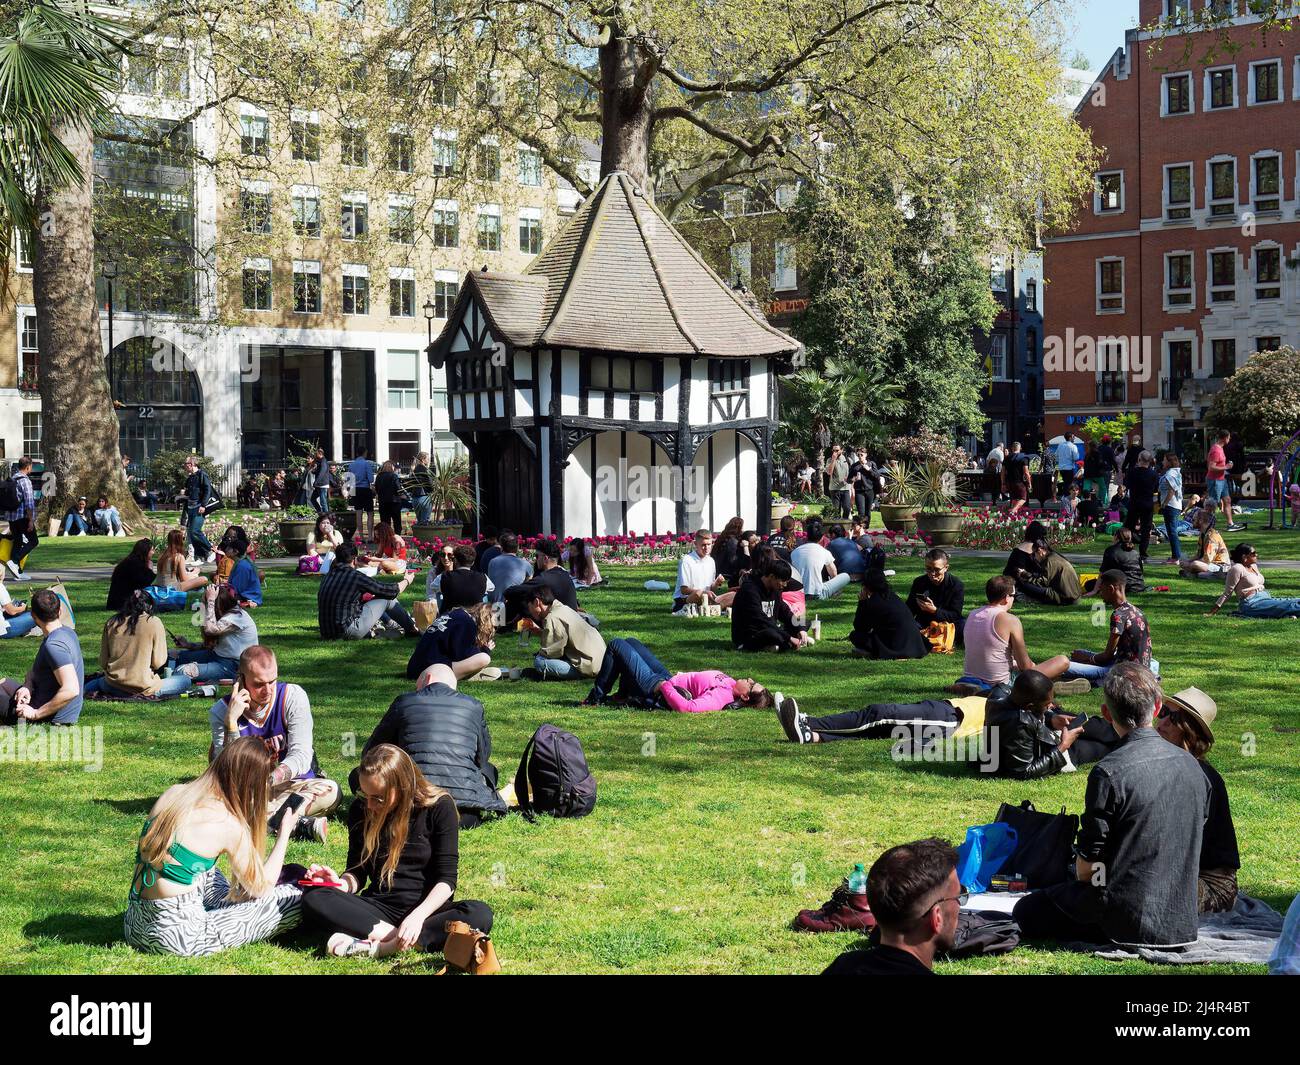 A view of people relaxing on a sunny Spring day in Soho Square Gardens in London UK Stock Photo